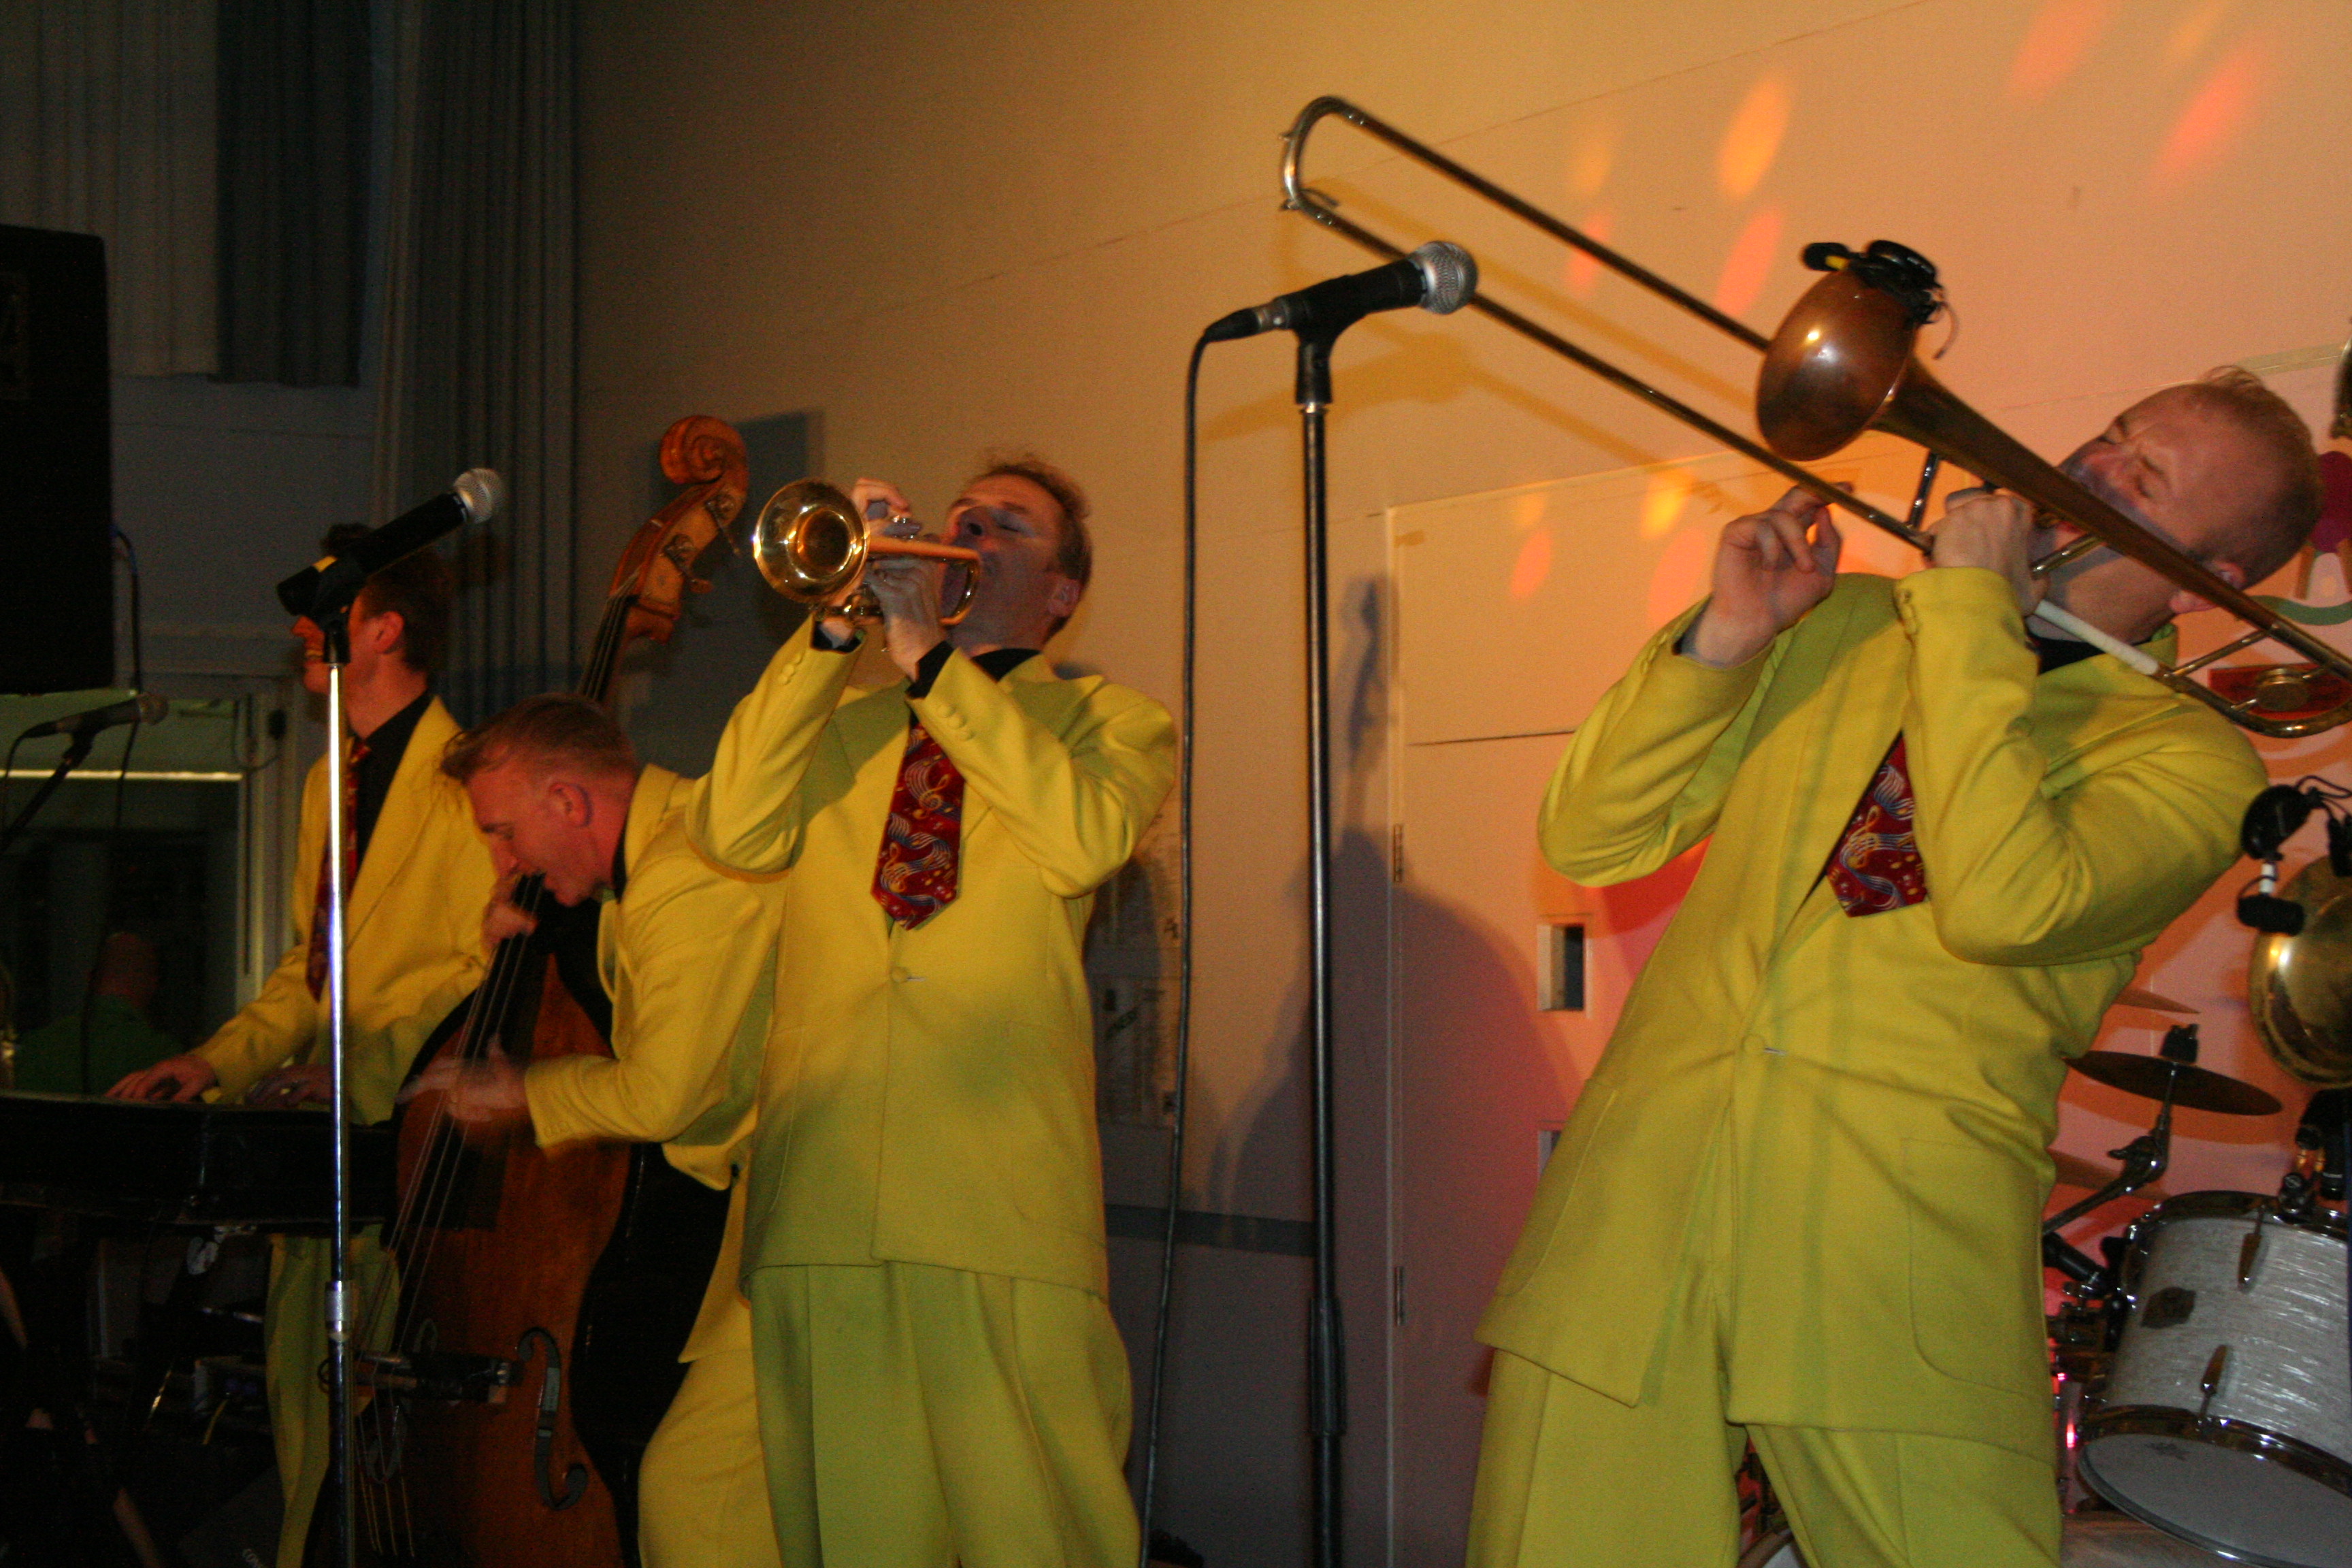 Jive Aces perform at Valentine Swinging Ball